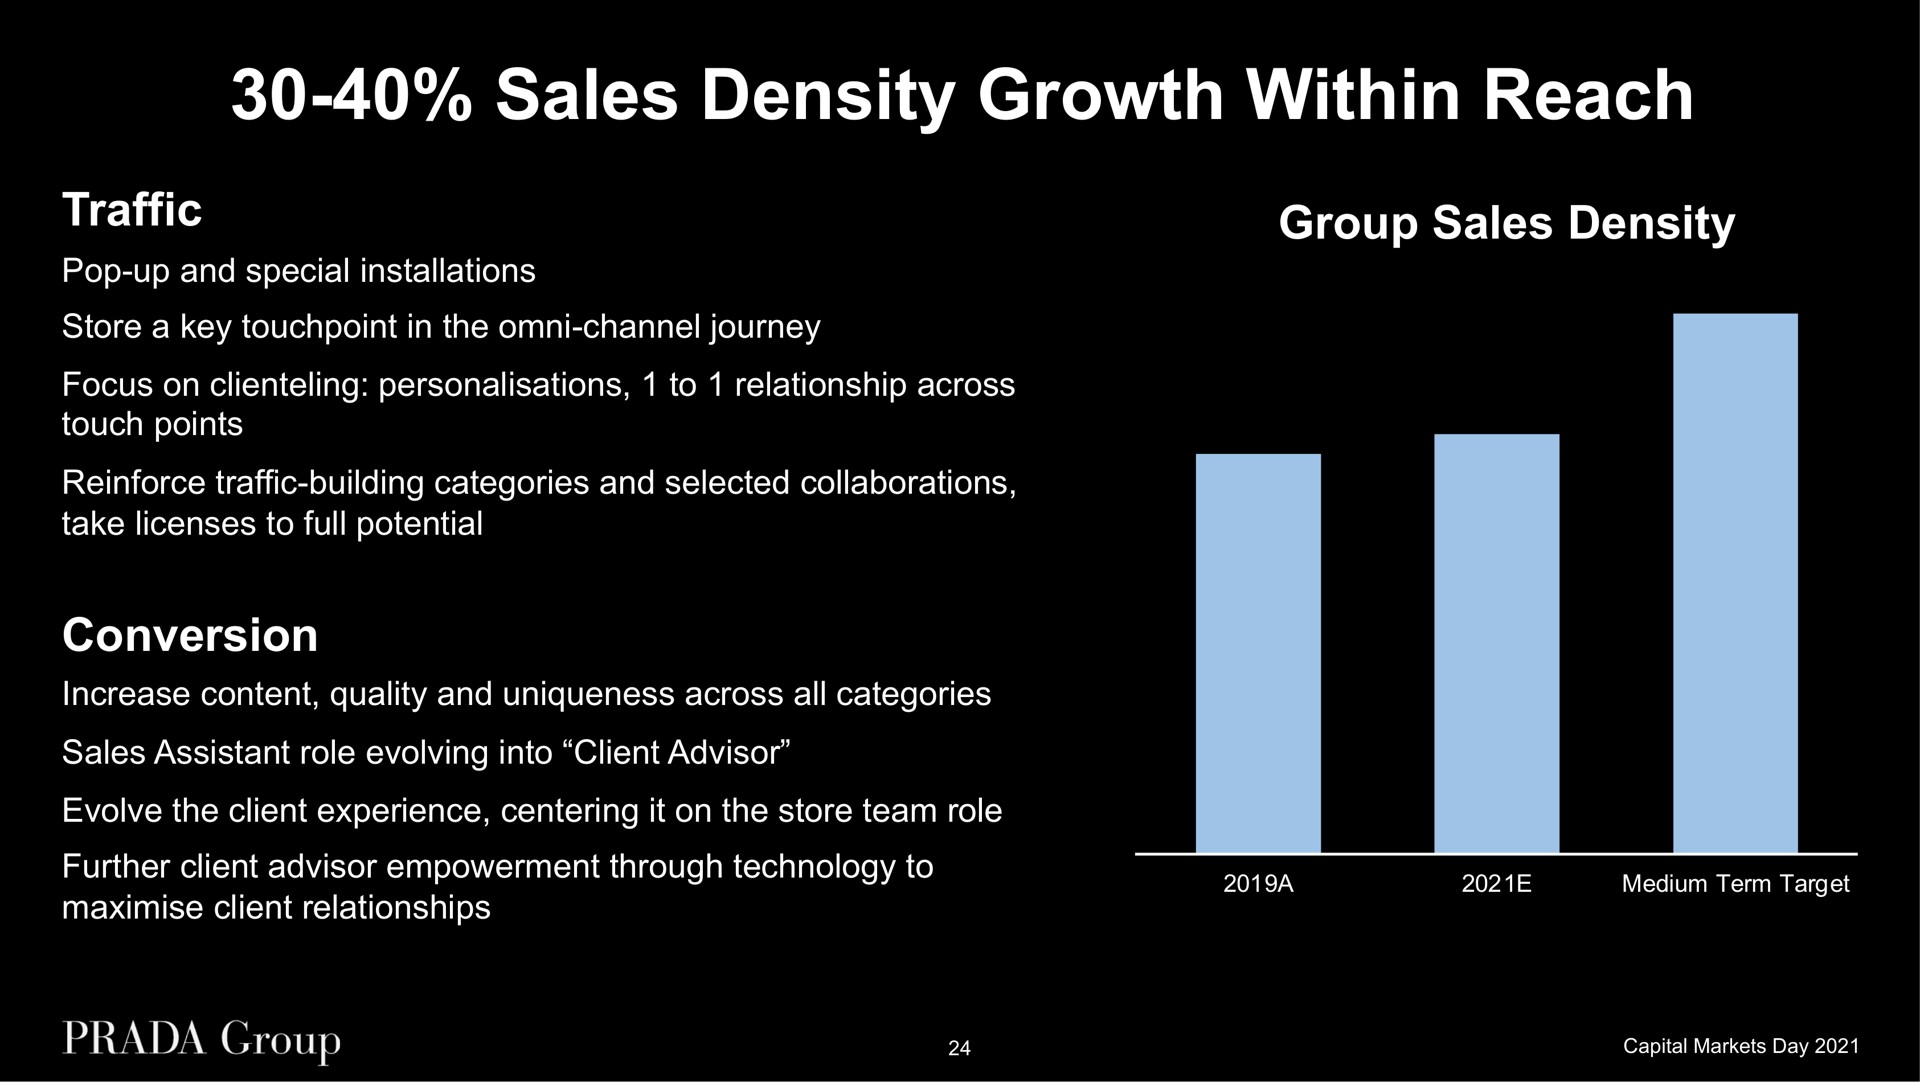 sales density growth within reach traffic pop up and special installations store a key in the channel journey focus on to relationship across touch points reinforce traffic building categories and selected collaborations take licenses to full potential conversion increase content quality and uniqueness across all categories sales assistant role evolving into client advisor evolve the client experience centering it on the store team role further client advisor empowerment through technology to client relationships group sales density | Prada